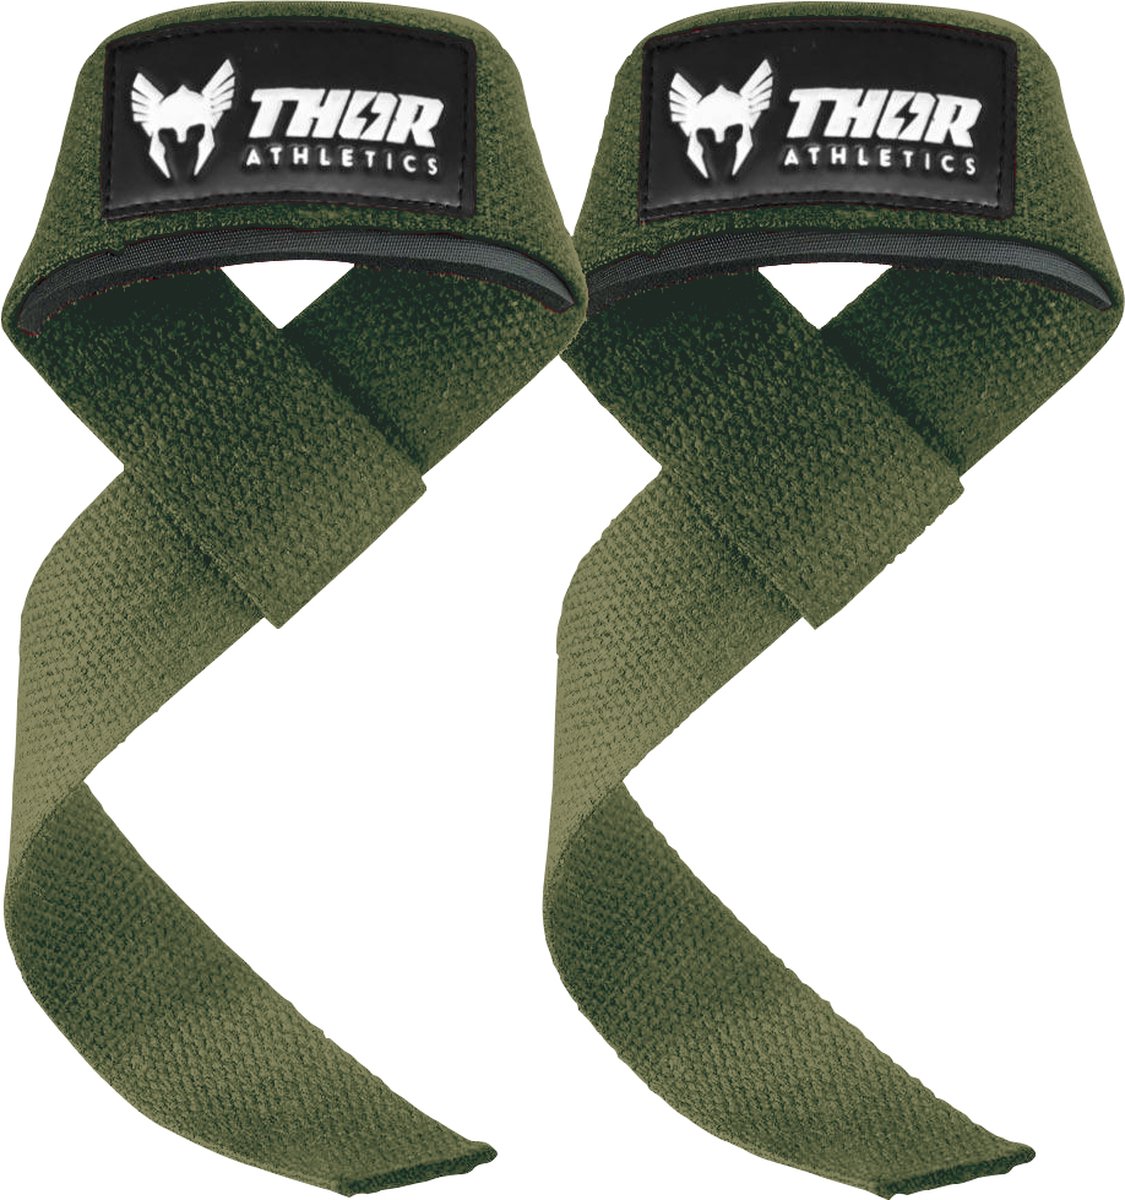 Thor Athletics Lifting Straps - Krachttraining Accessoires - Powerlifting Straps - Deadlift Straps - Army Green